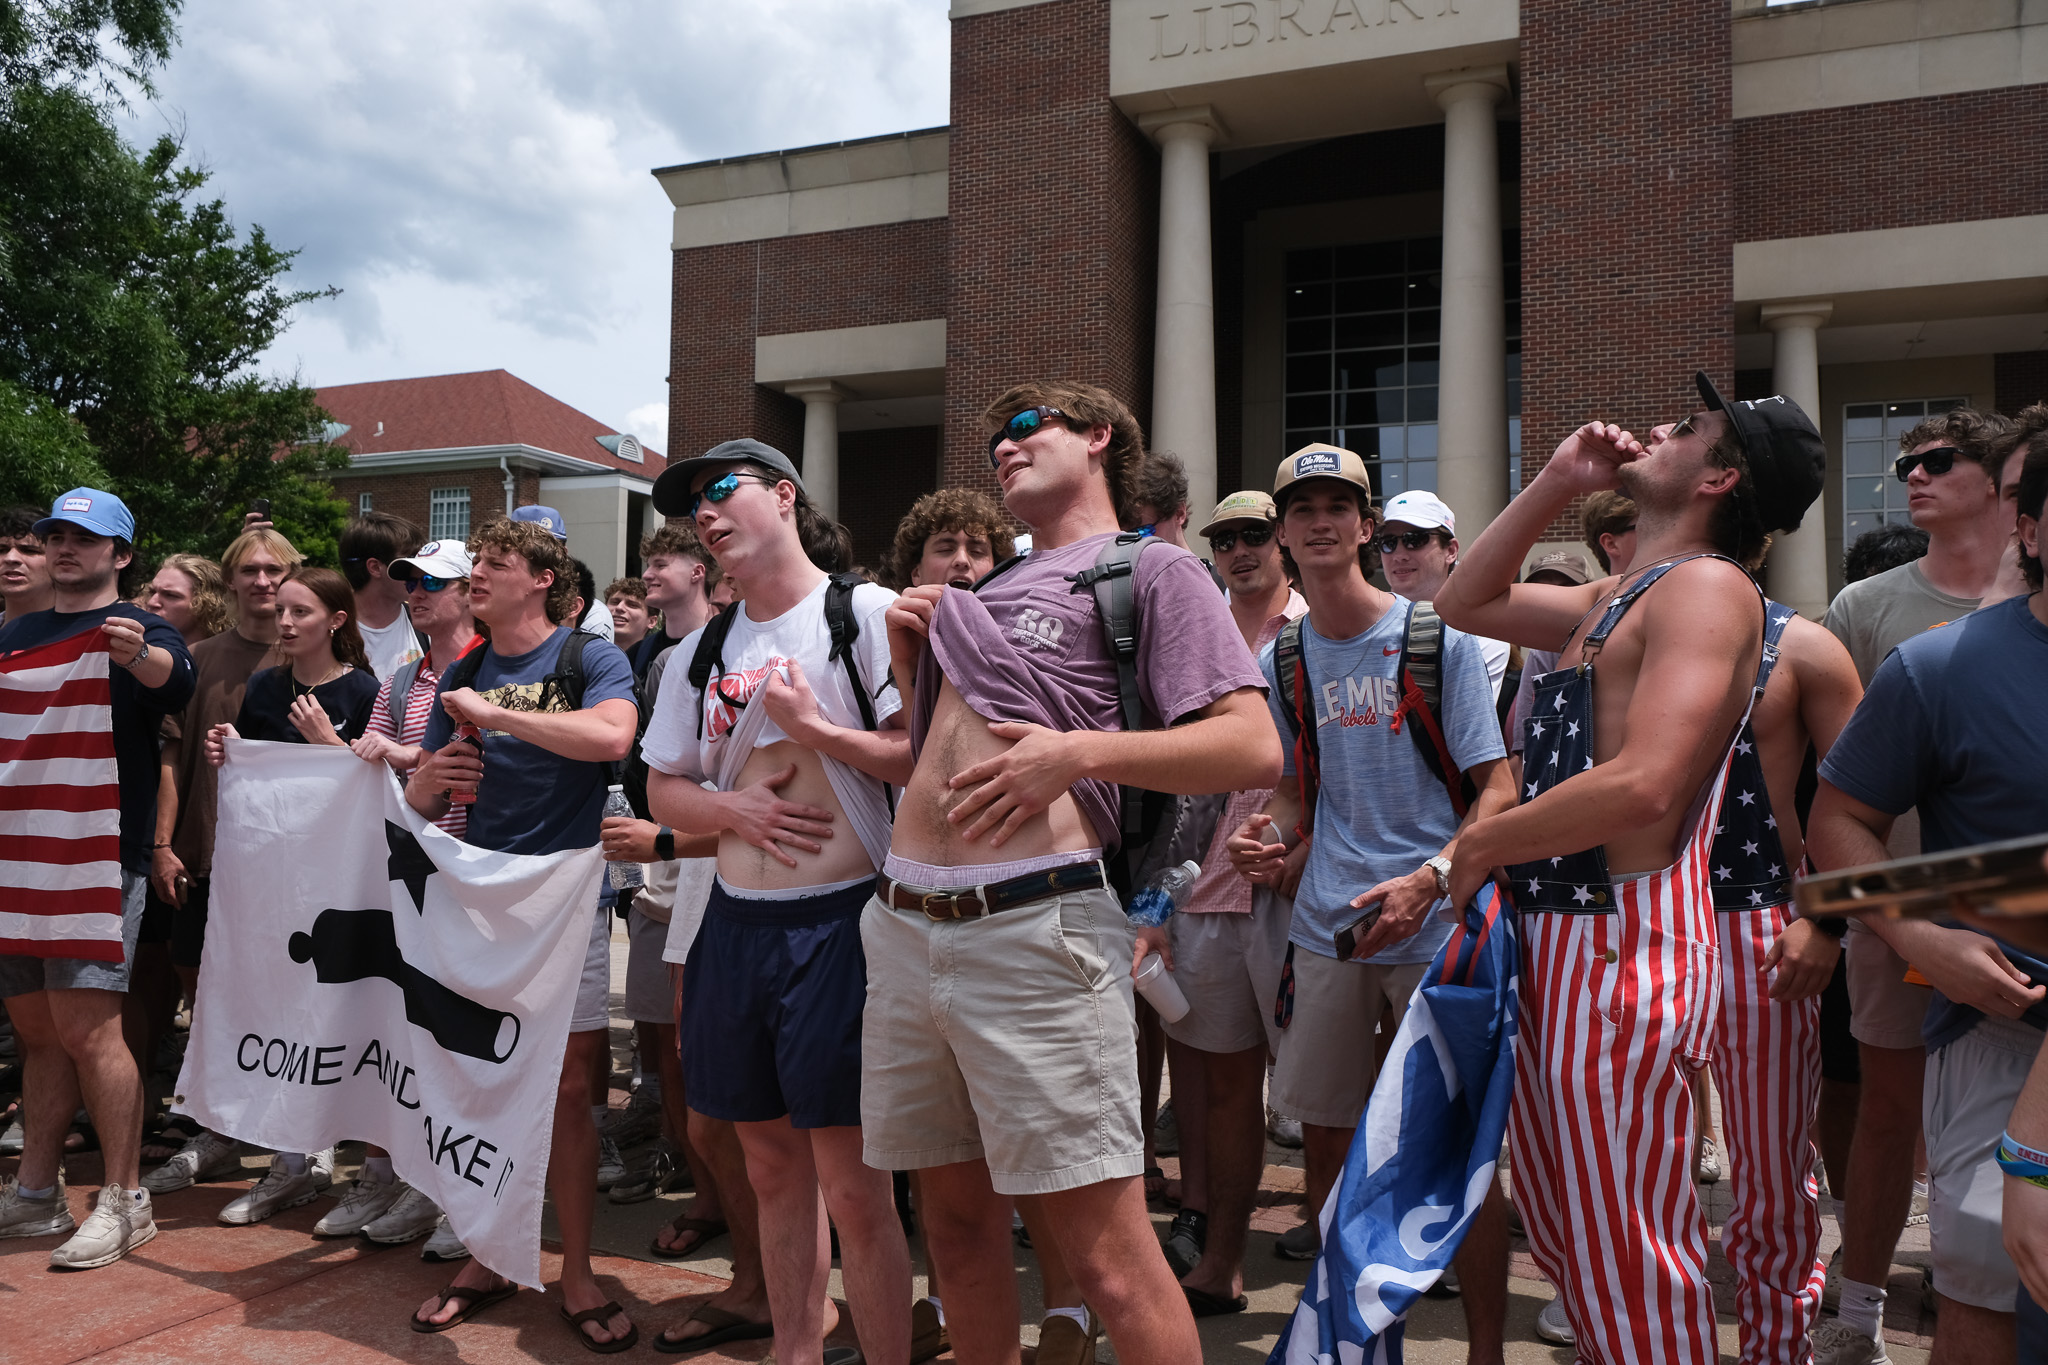 photo of university of mississippi students with 'trump won' flag is altered | fact check